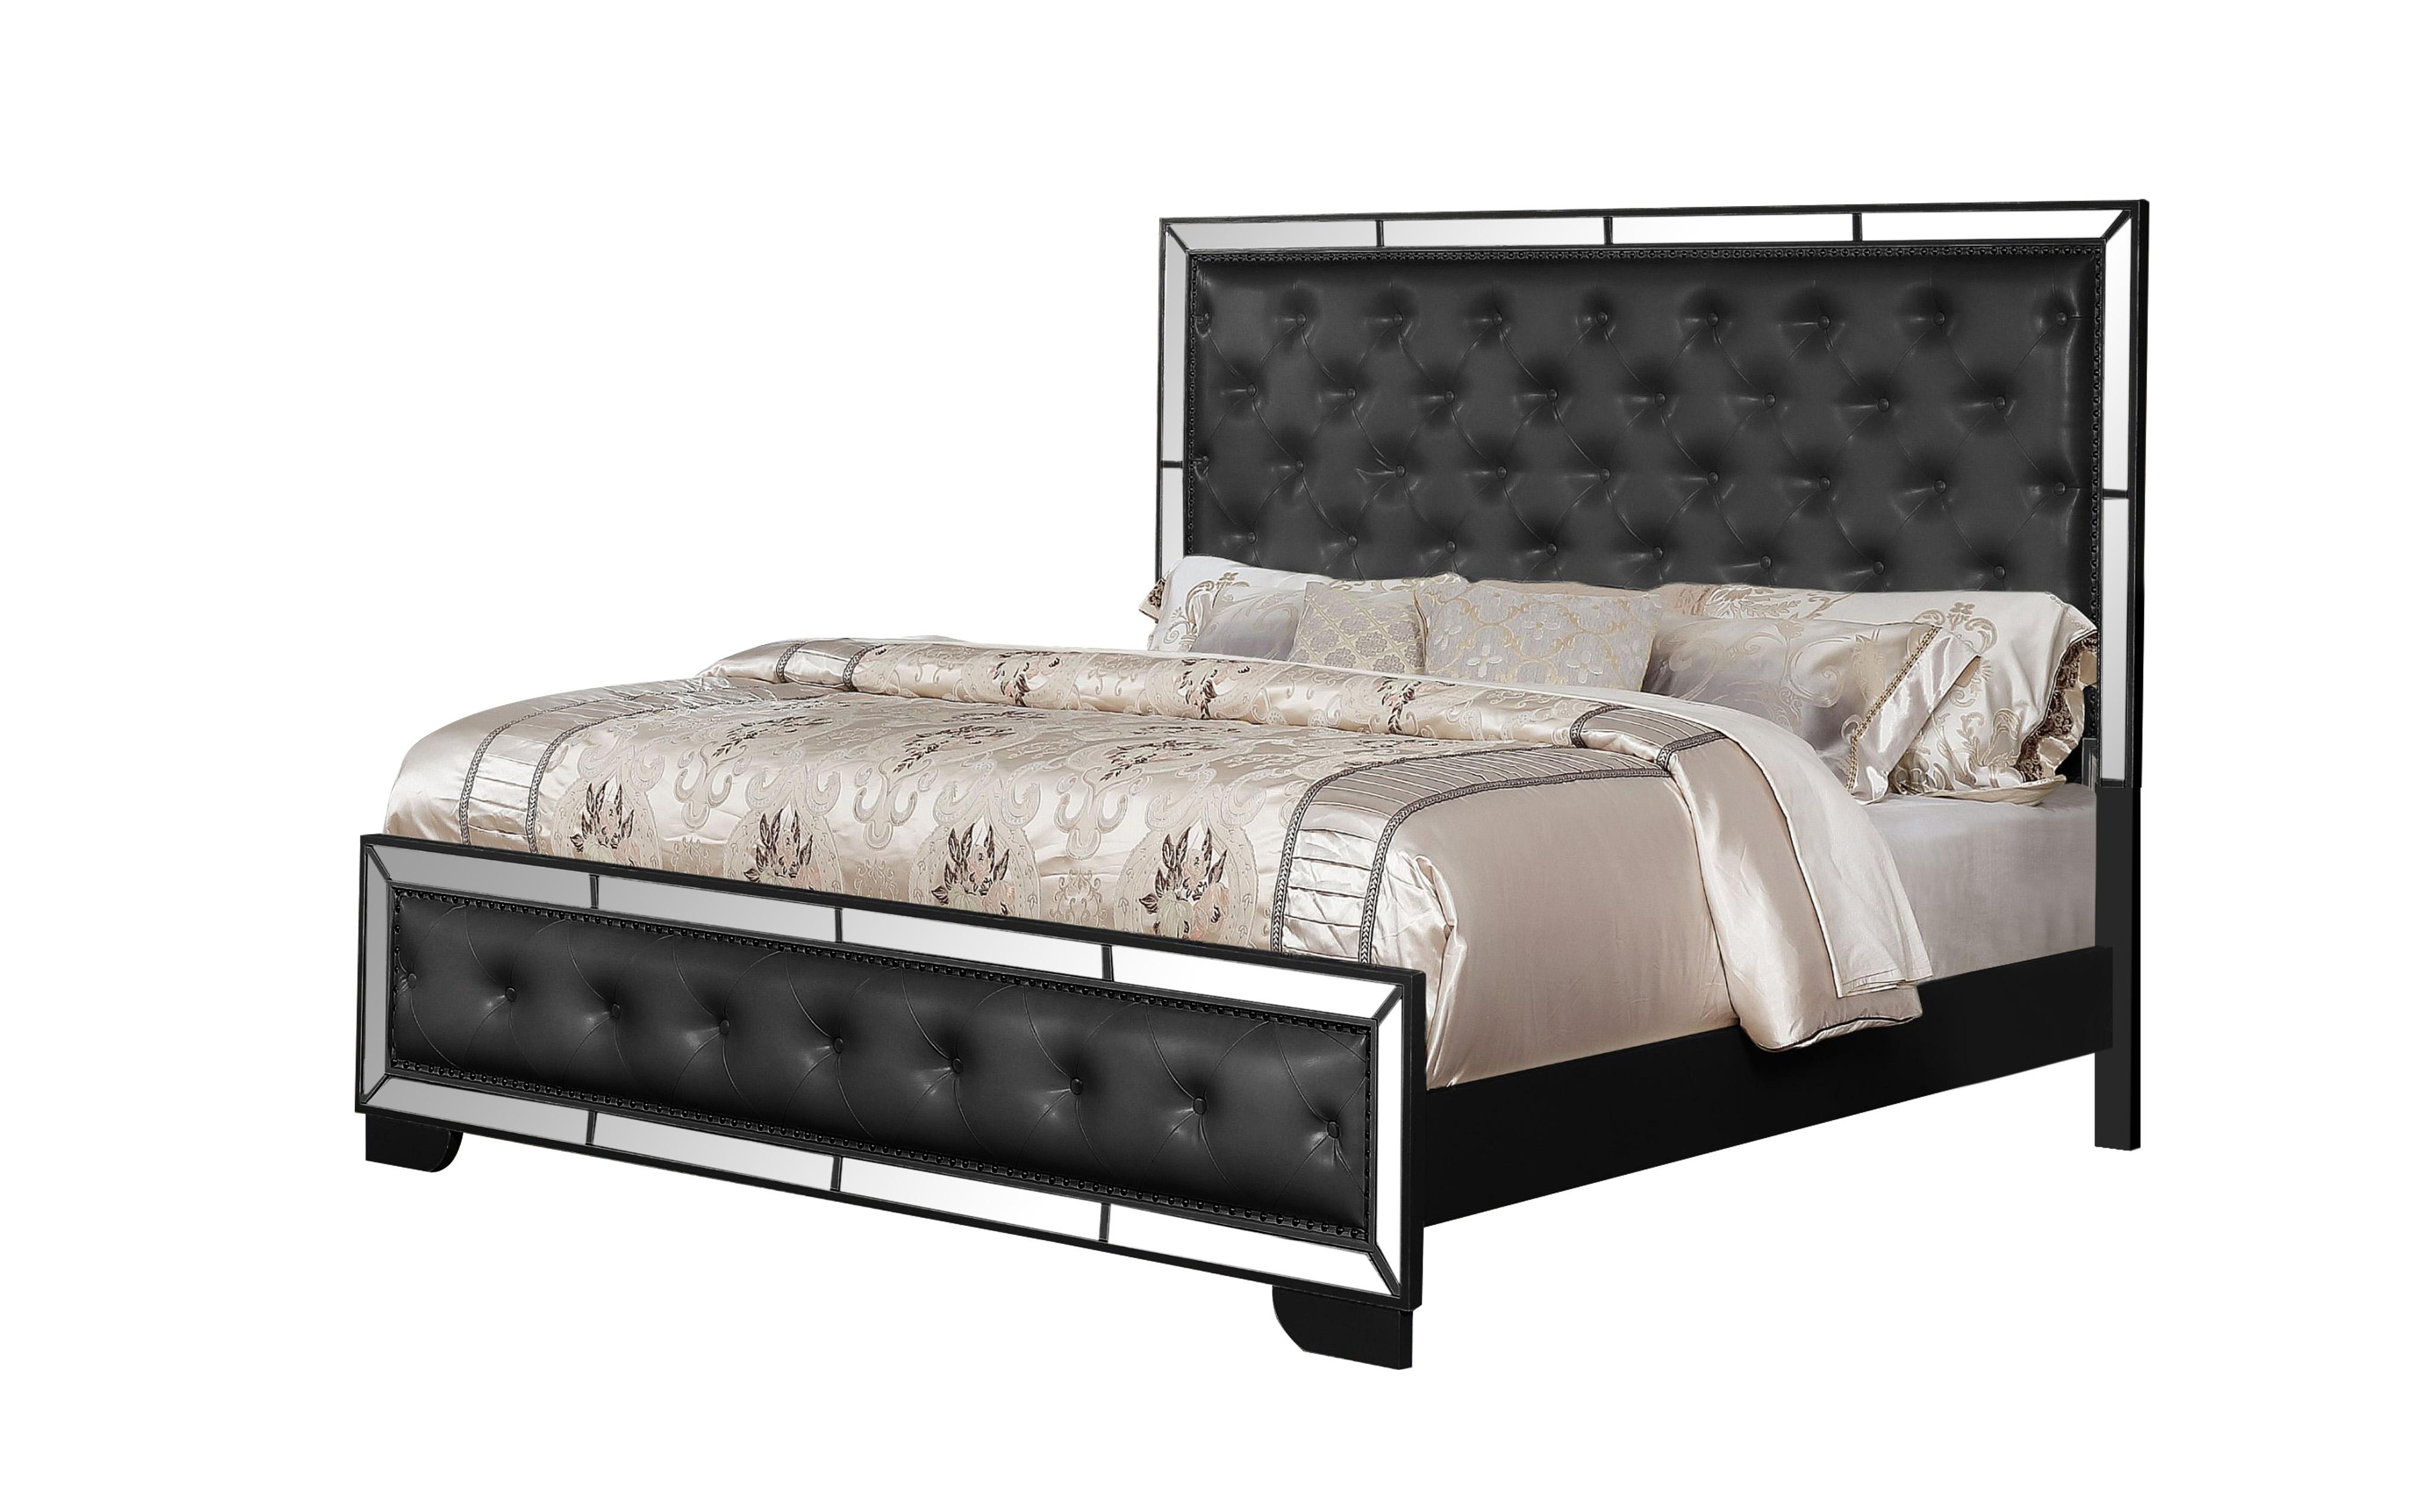 

    
Glam Black & Mirrored Inlays Button Tufted King Bed MADISON Galaxy Home Modern
